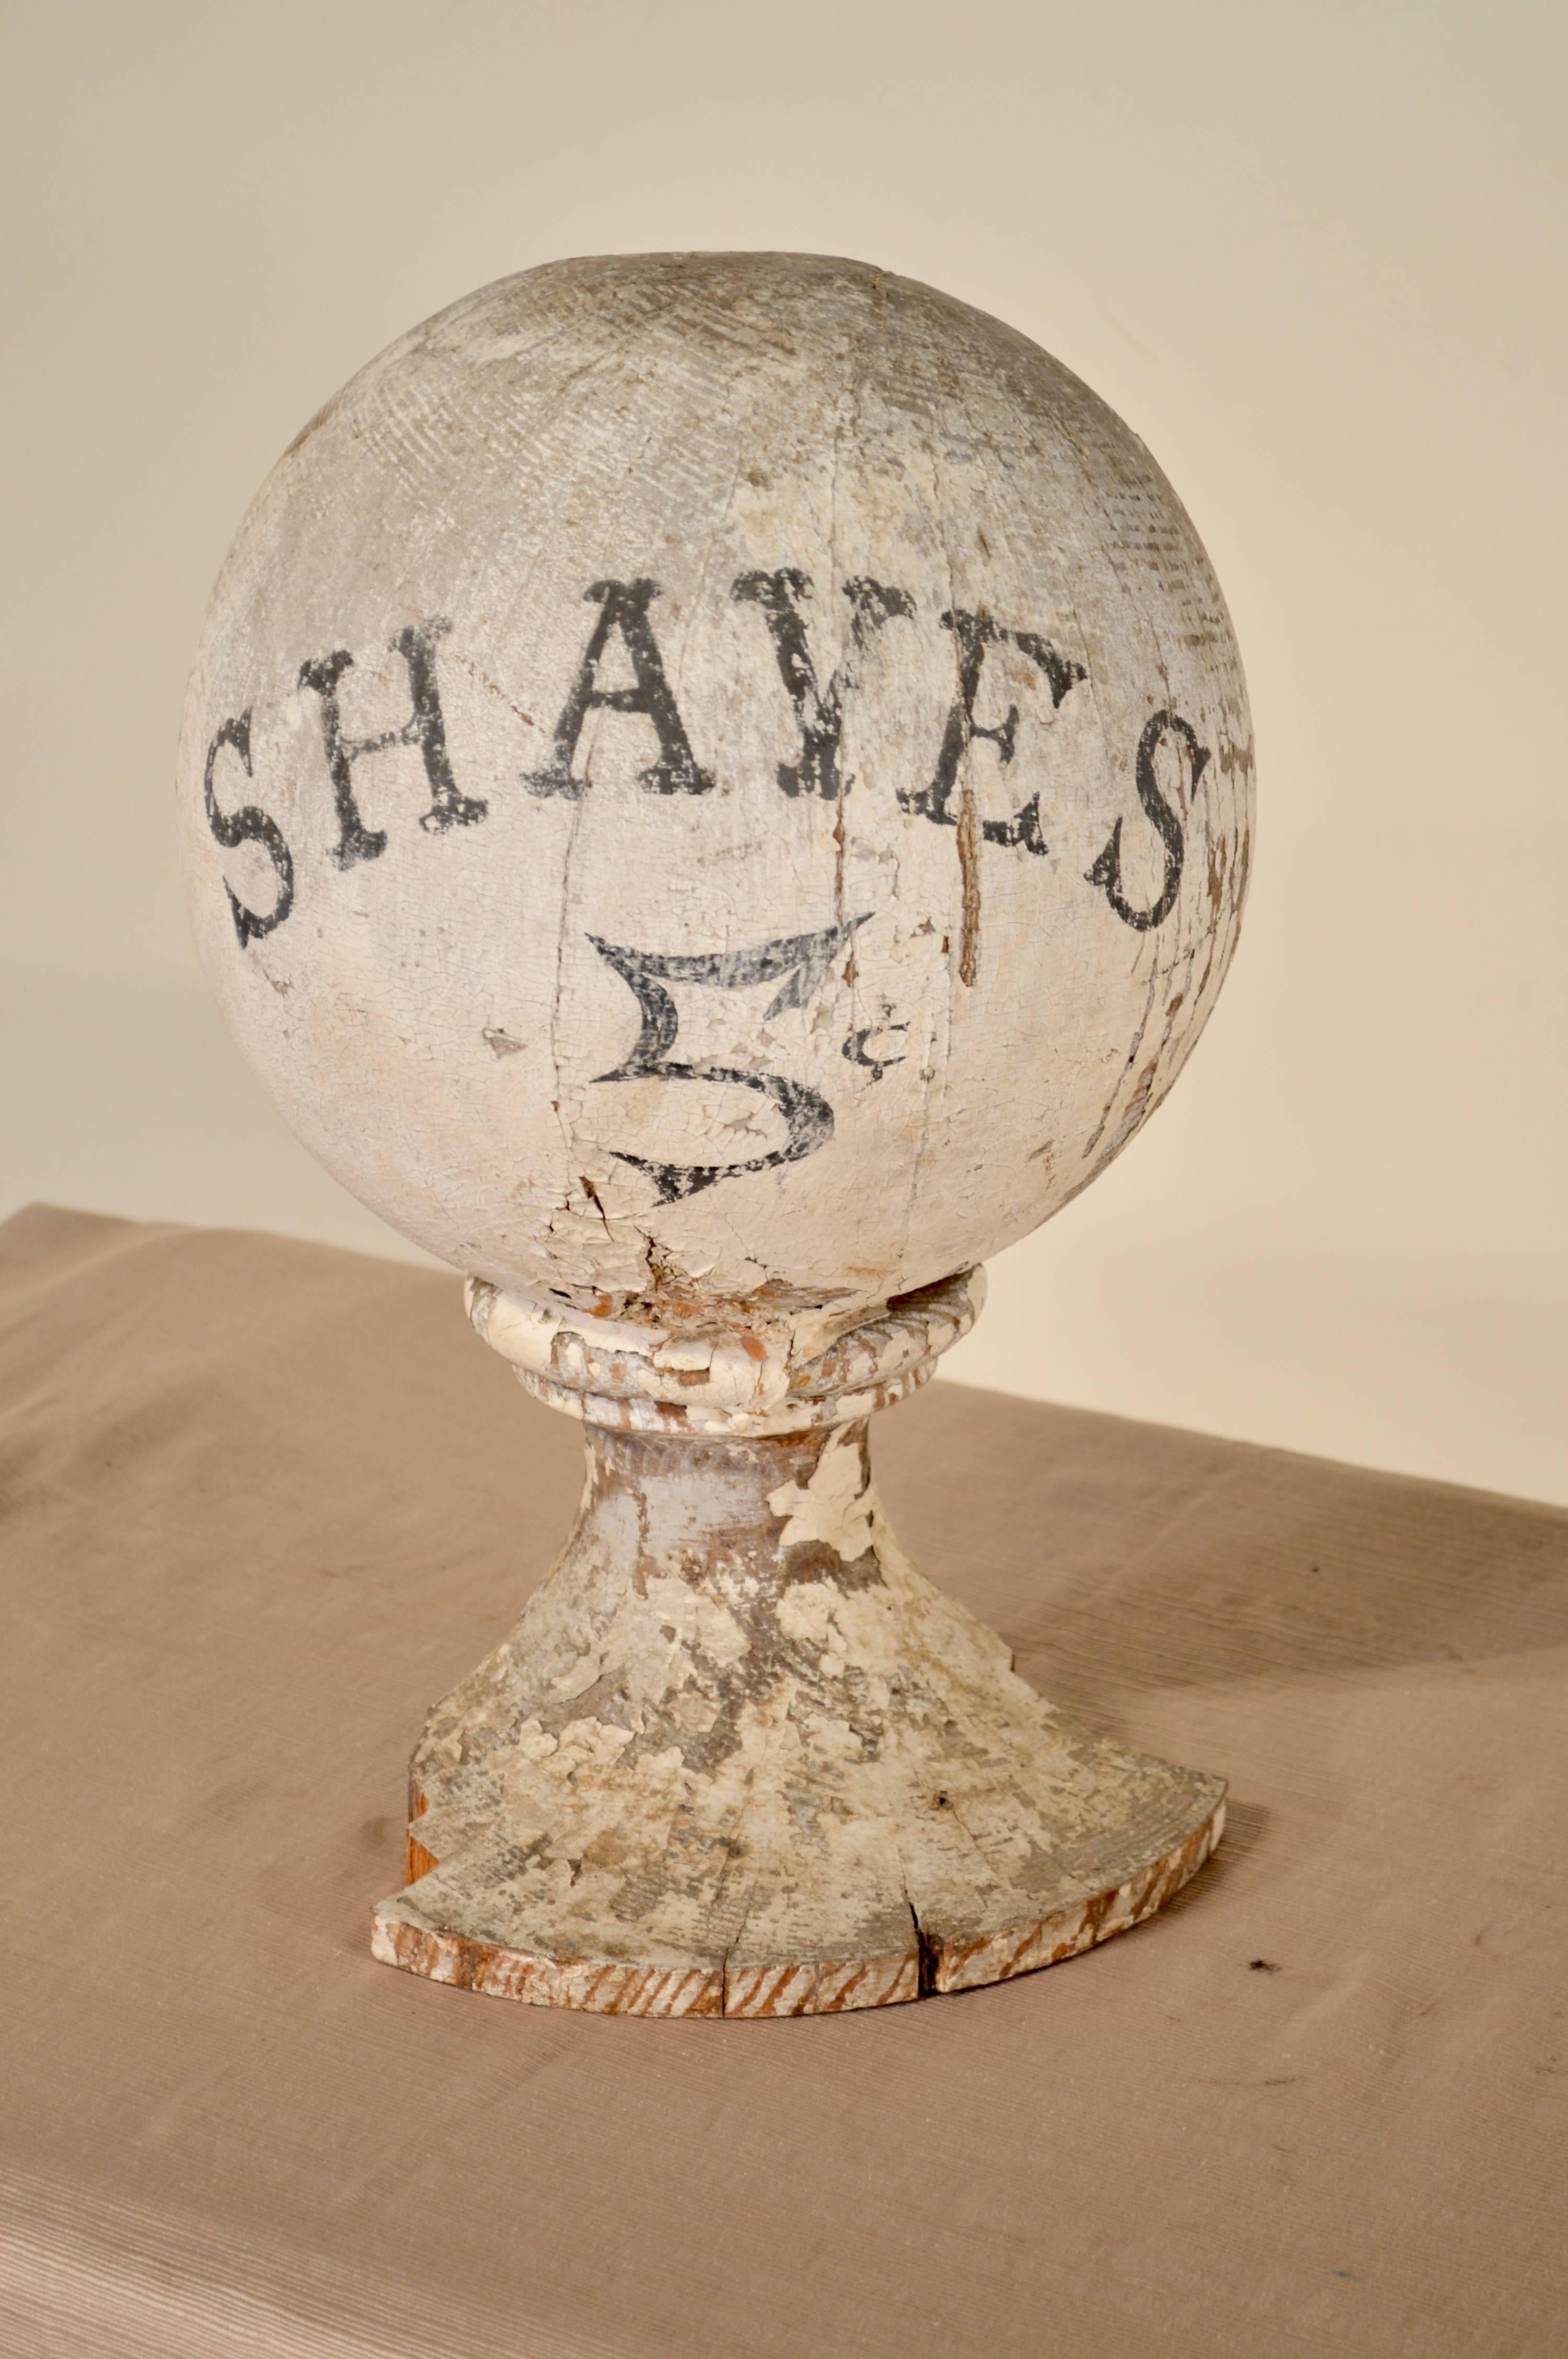 19th century American shaving advertisement sign. Wear and losses to paint.